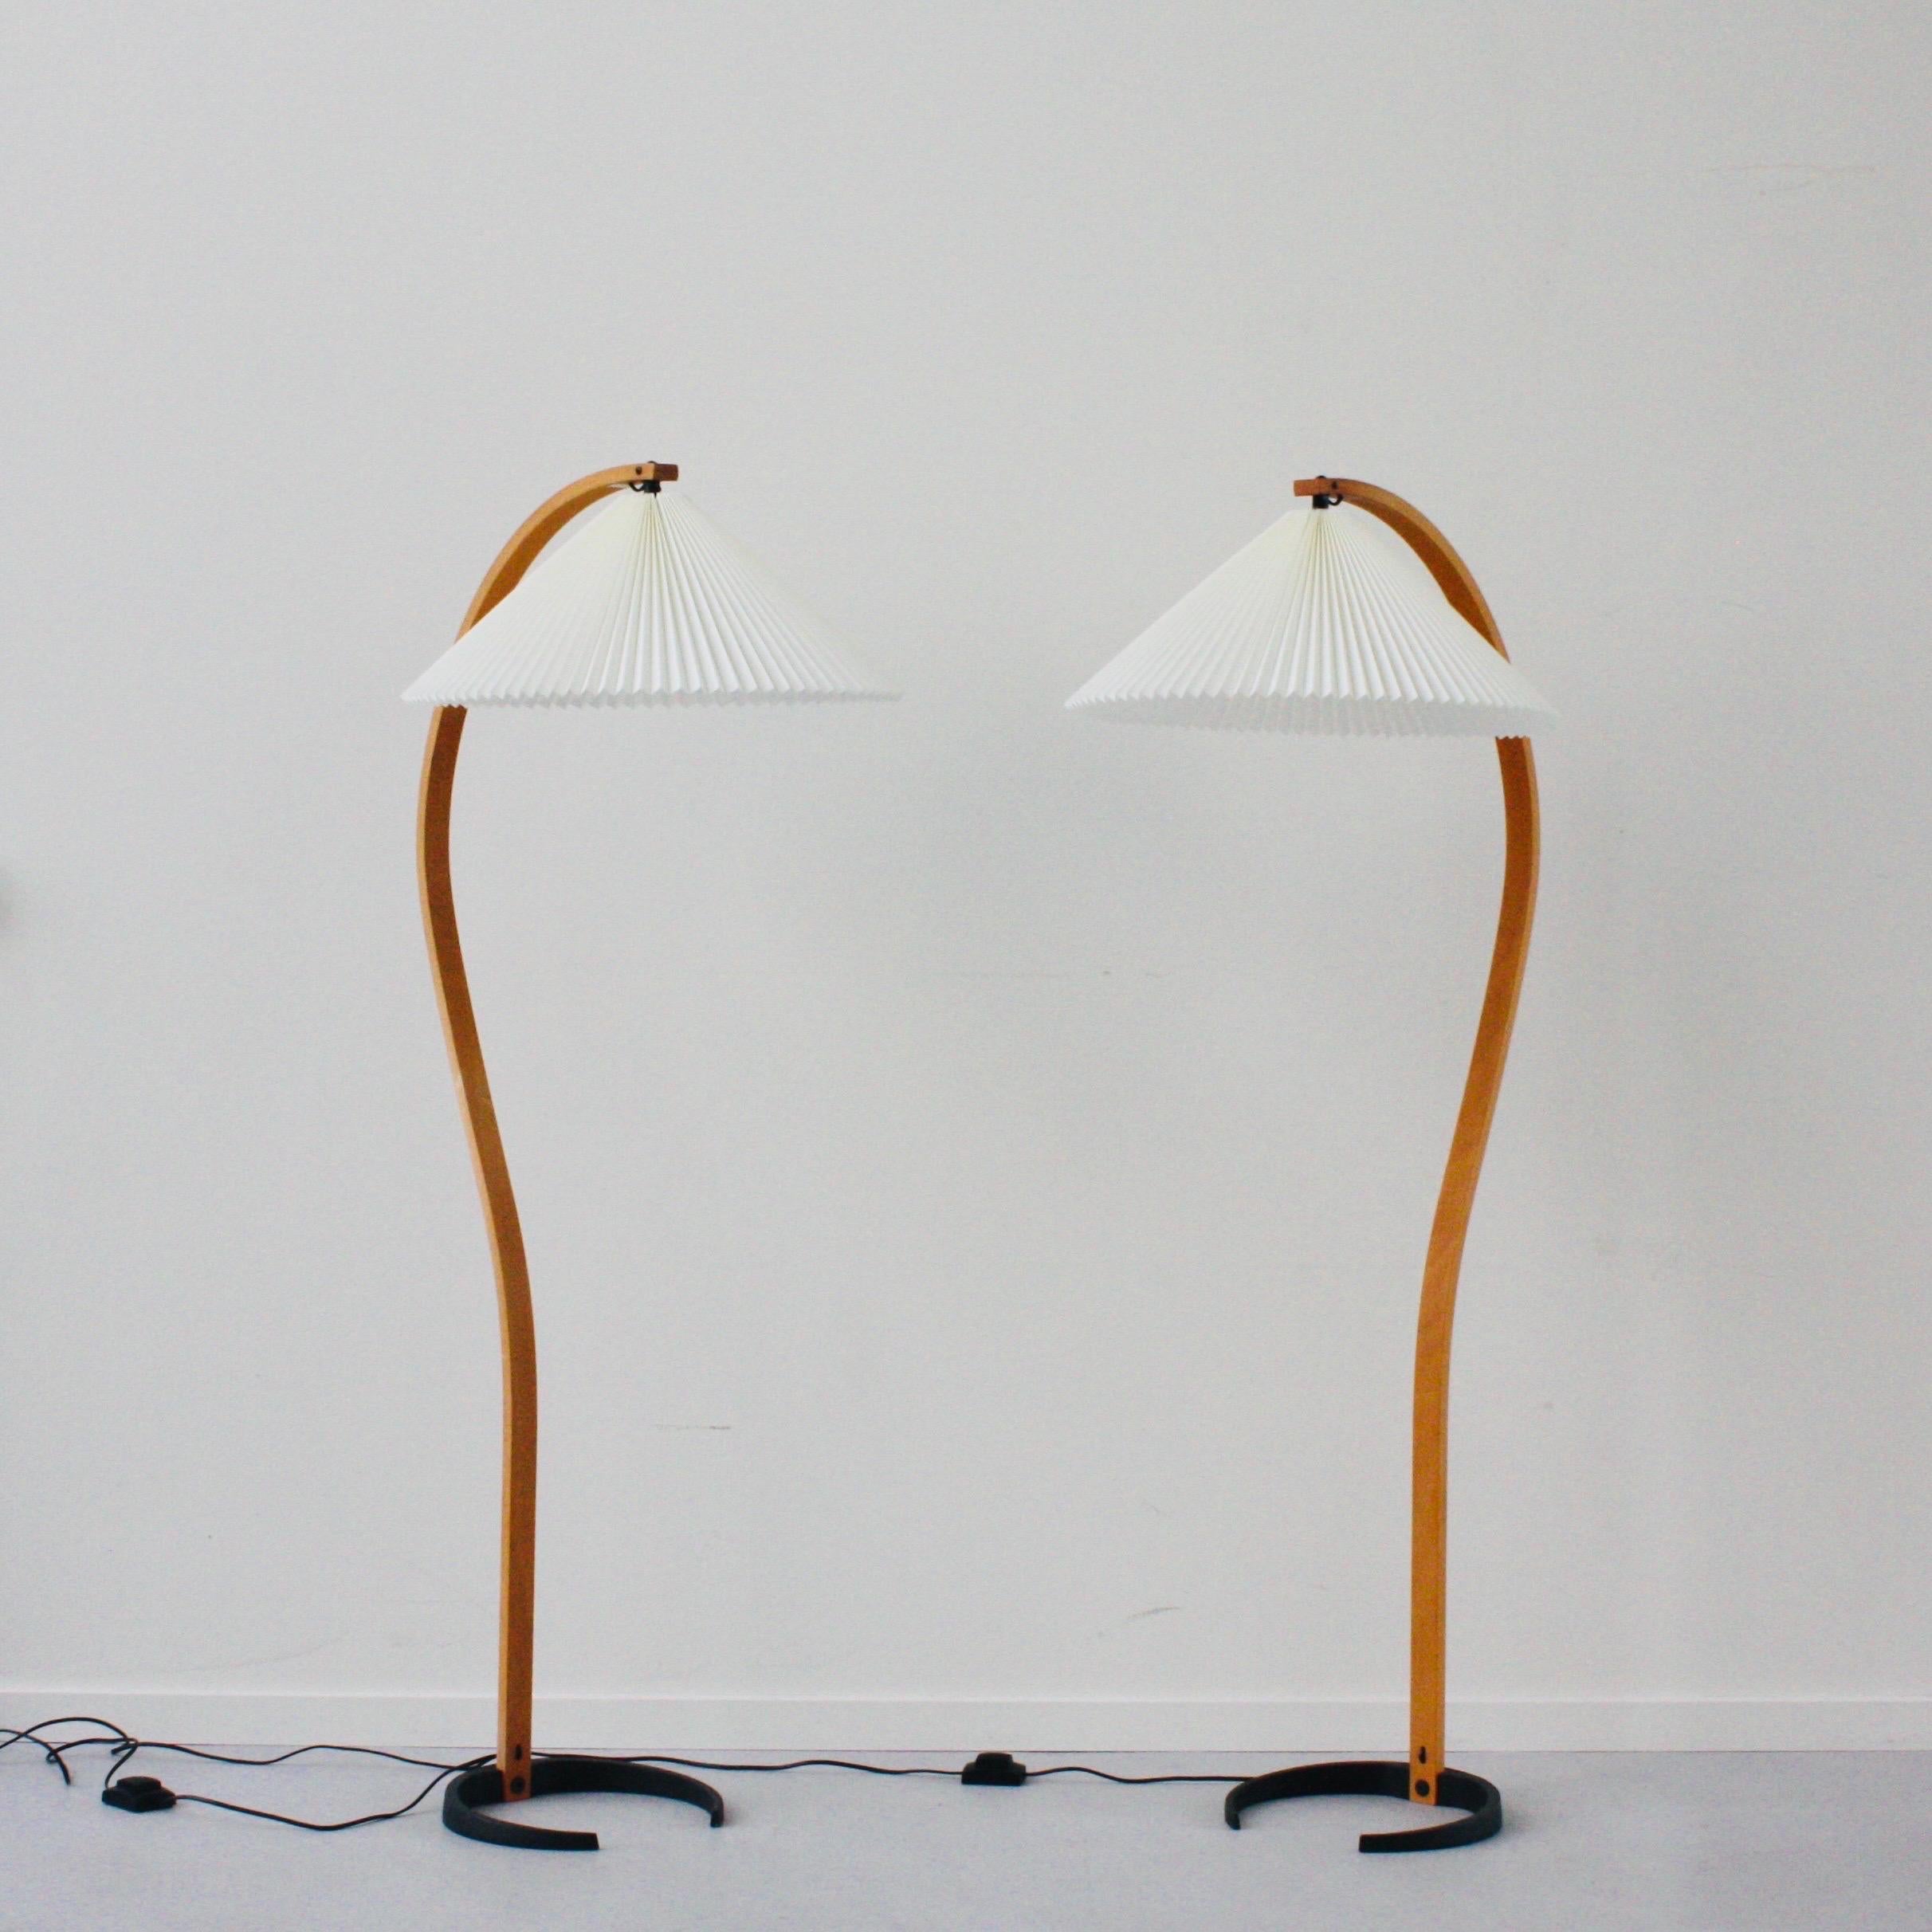 A pair of original Danish Timberline no. 840 floor lamps by Mads Caprani. A striking design - at the same time both quintessentially 1970s and timeless - perfect for any modern interior.

* A set (2) of bend beech veneer floor lamps with new